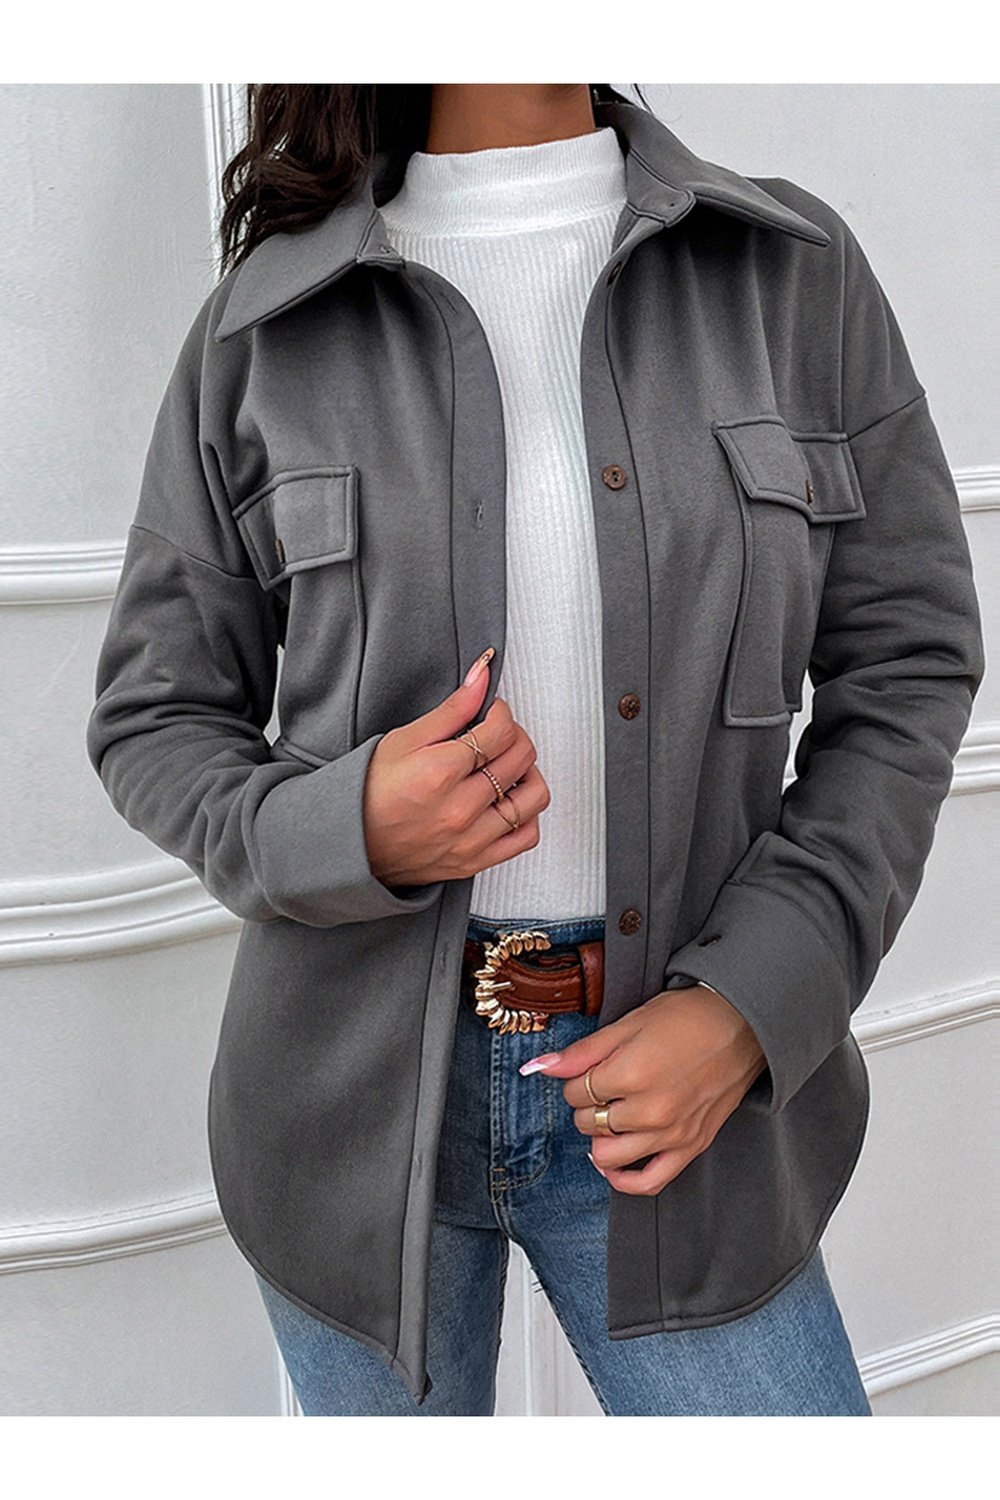 Button Down Dropped Shoulder Coat - Jackets - FITGGINS